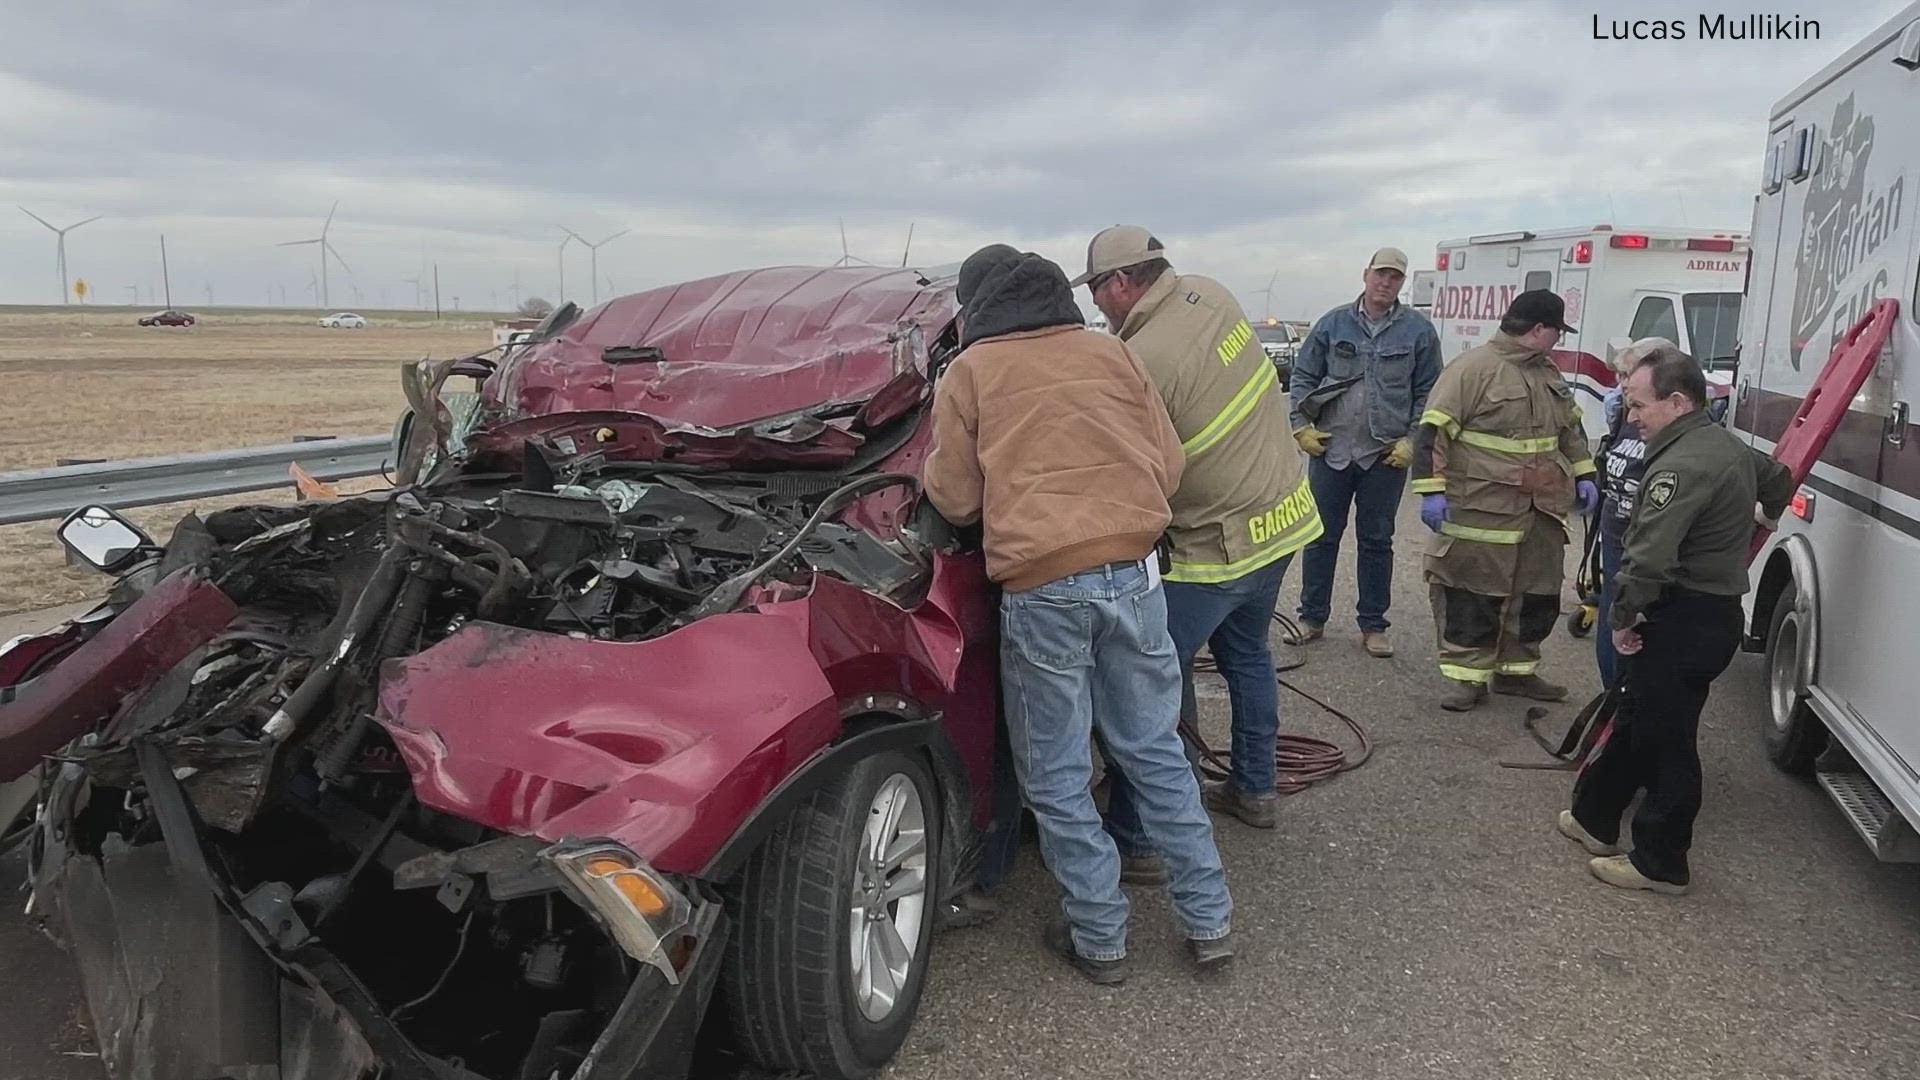 The woman was travelling to New Mexico when she accidently struck the back of a semi-truck. A couple from Arizona acted quickly to save her life.